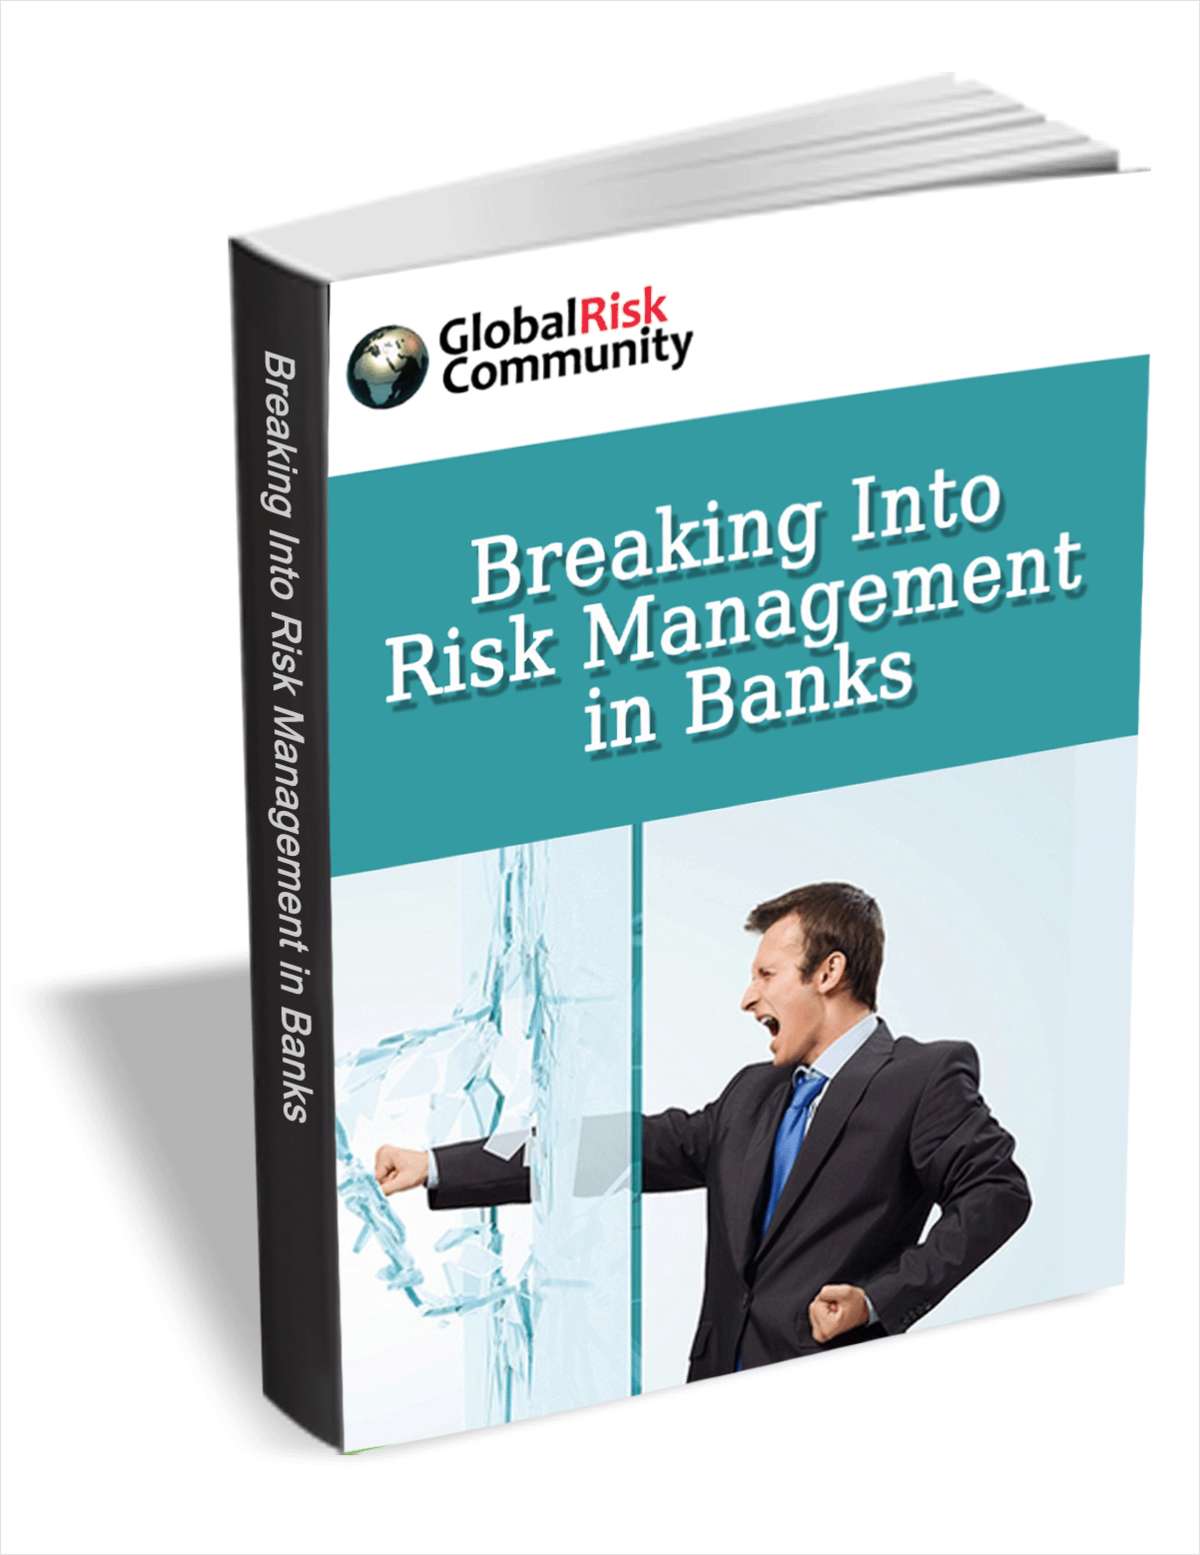 Breaking Into Risk Management in Banks (FREE eBook Training Course) A $47 Value!